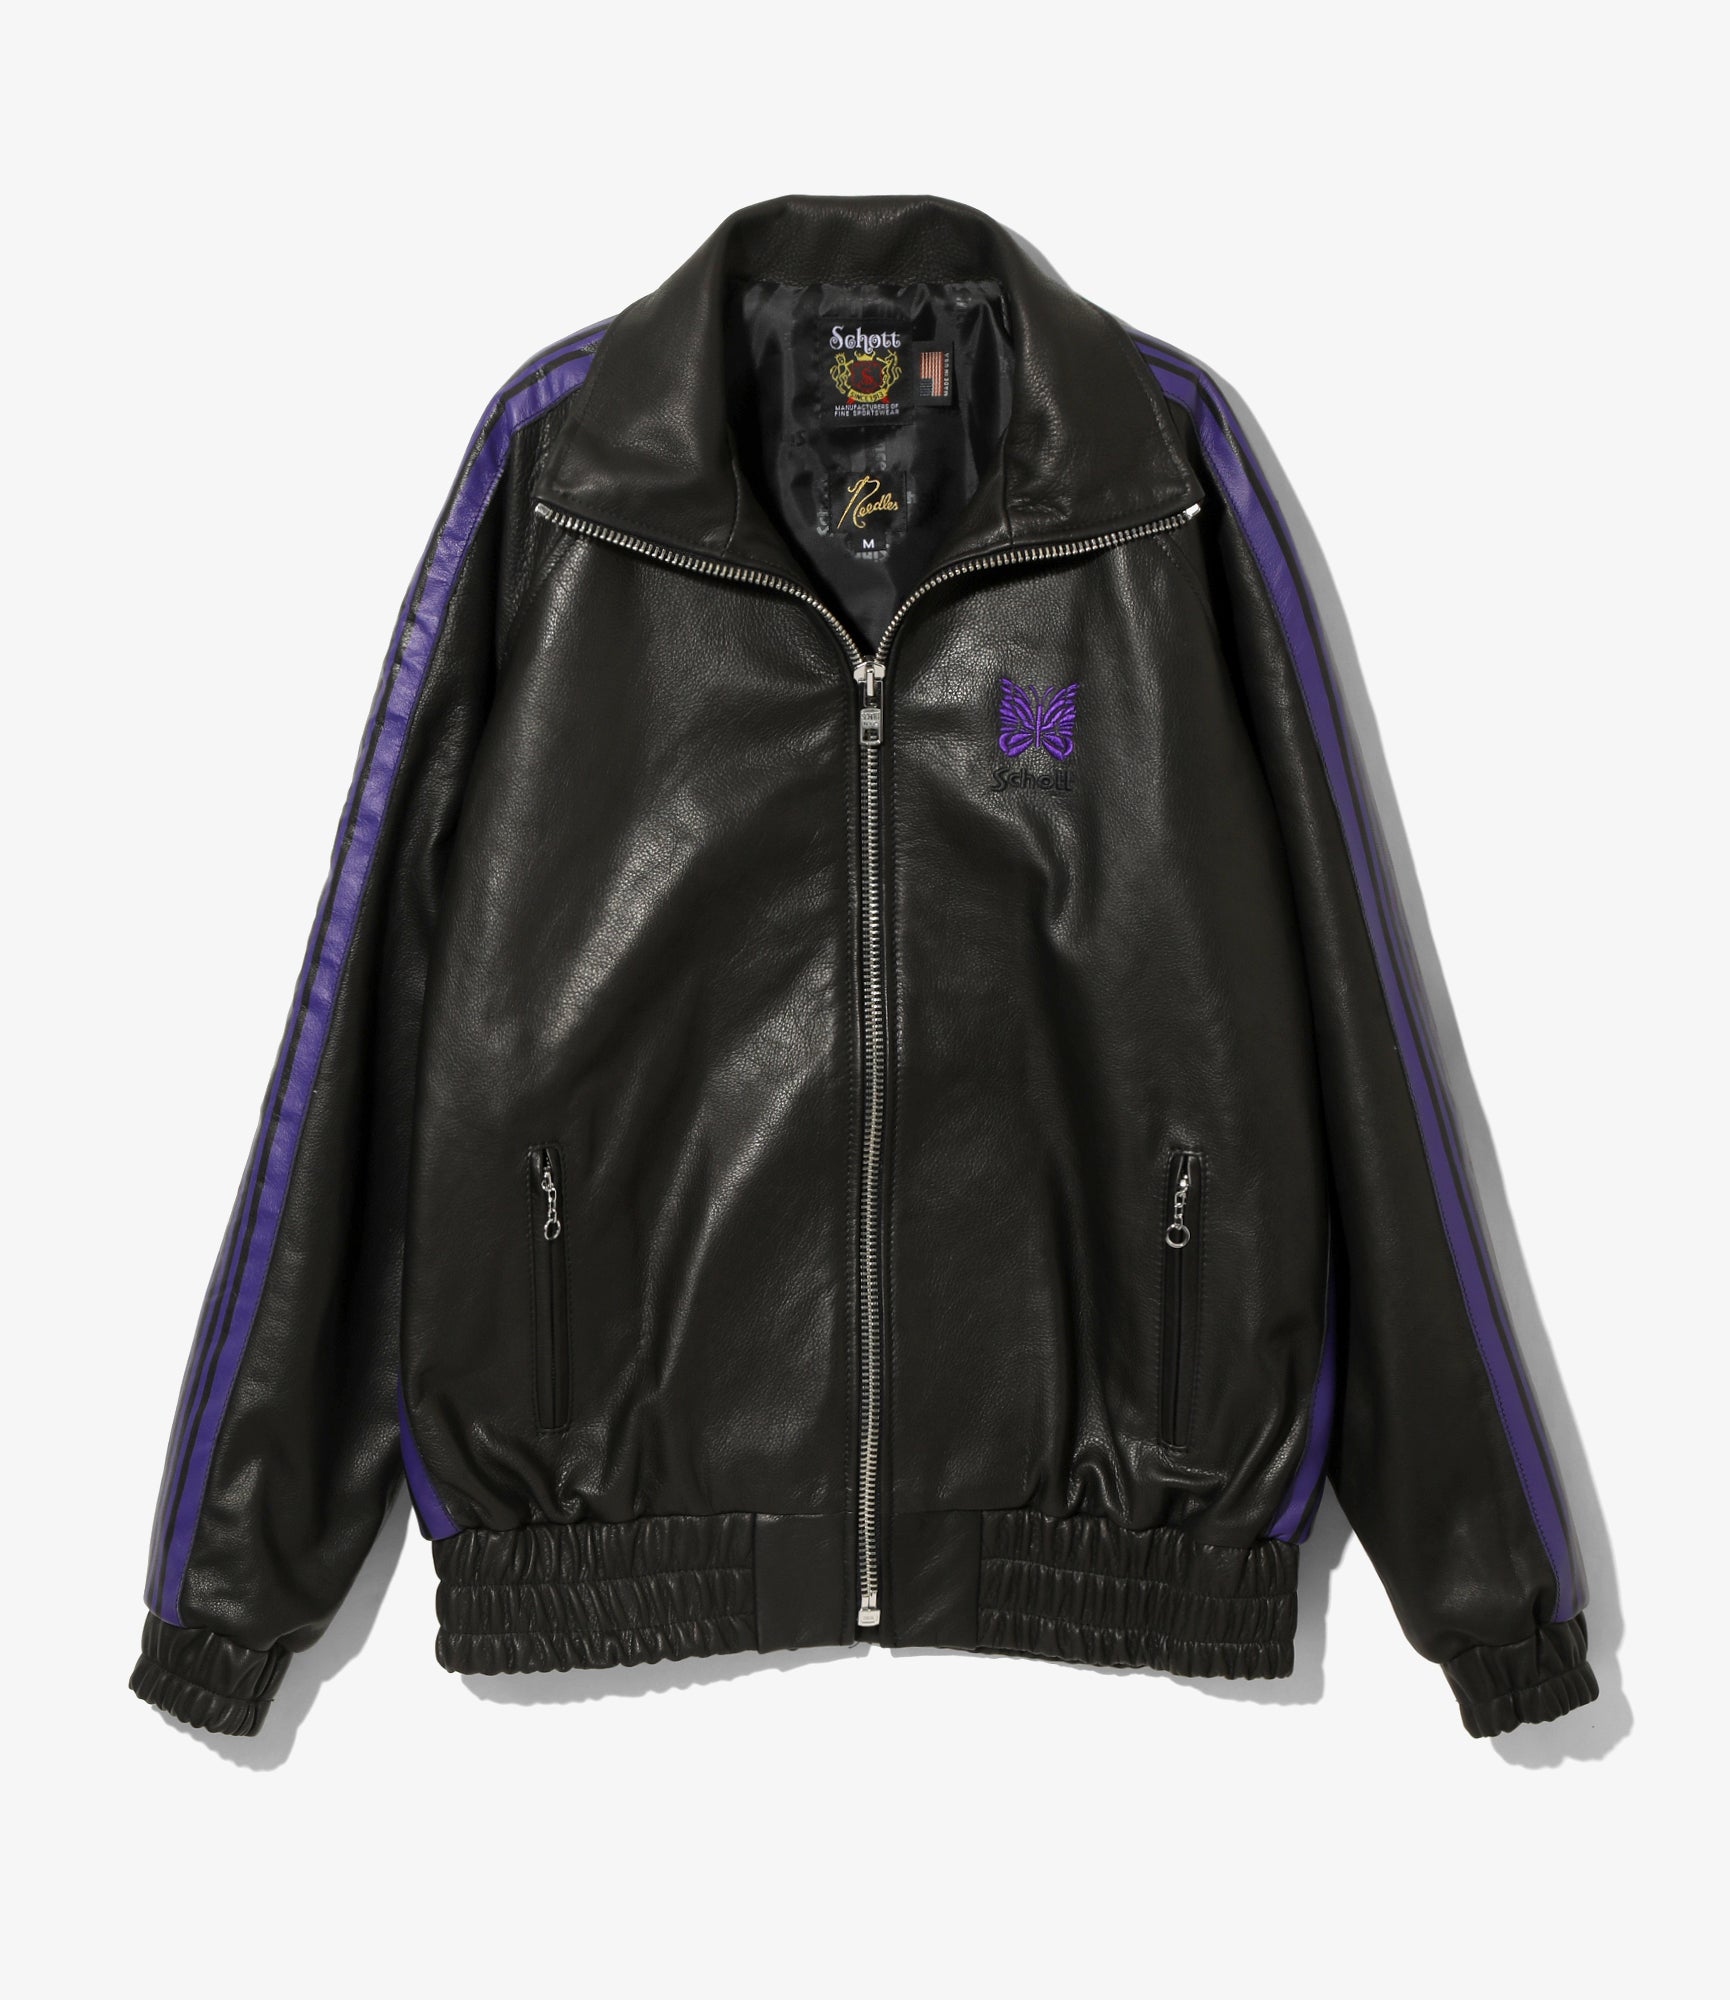 Needles x Schott - Track Jacket - Cowhide Leather | Nepenthes New York